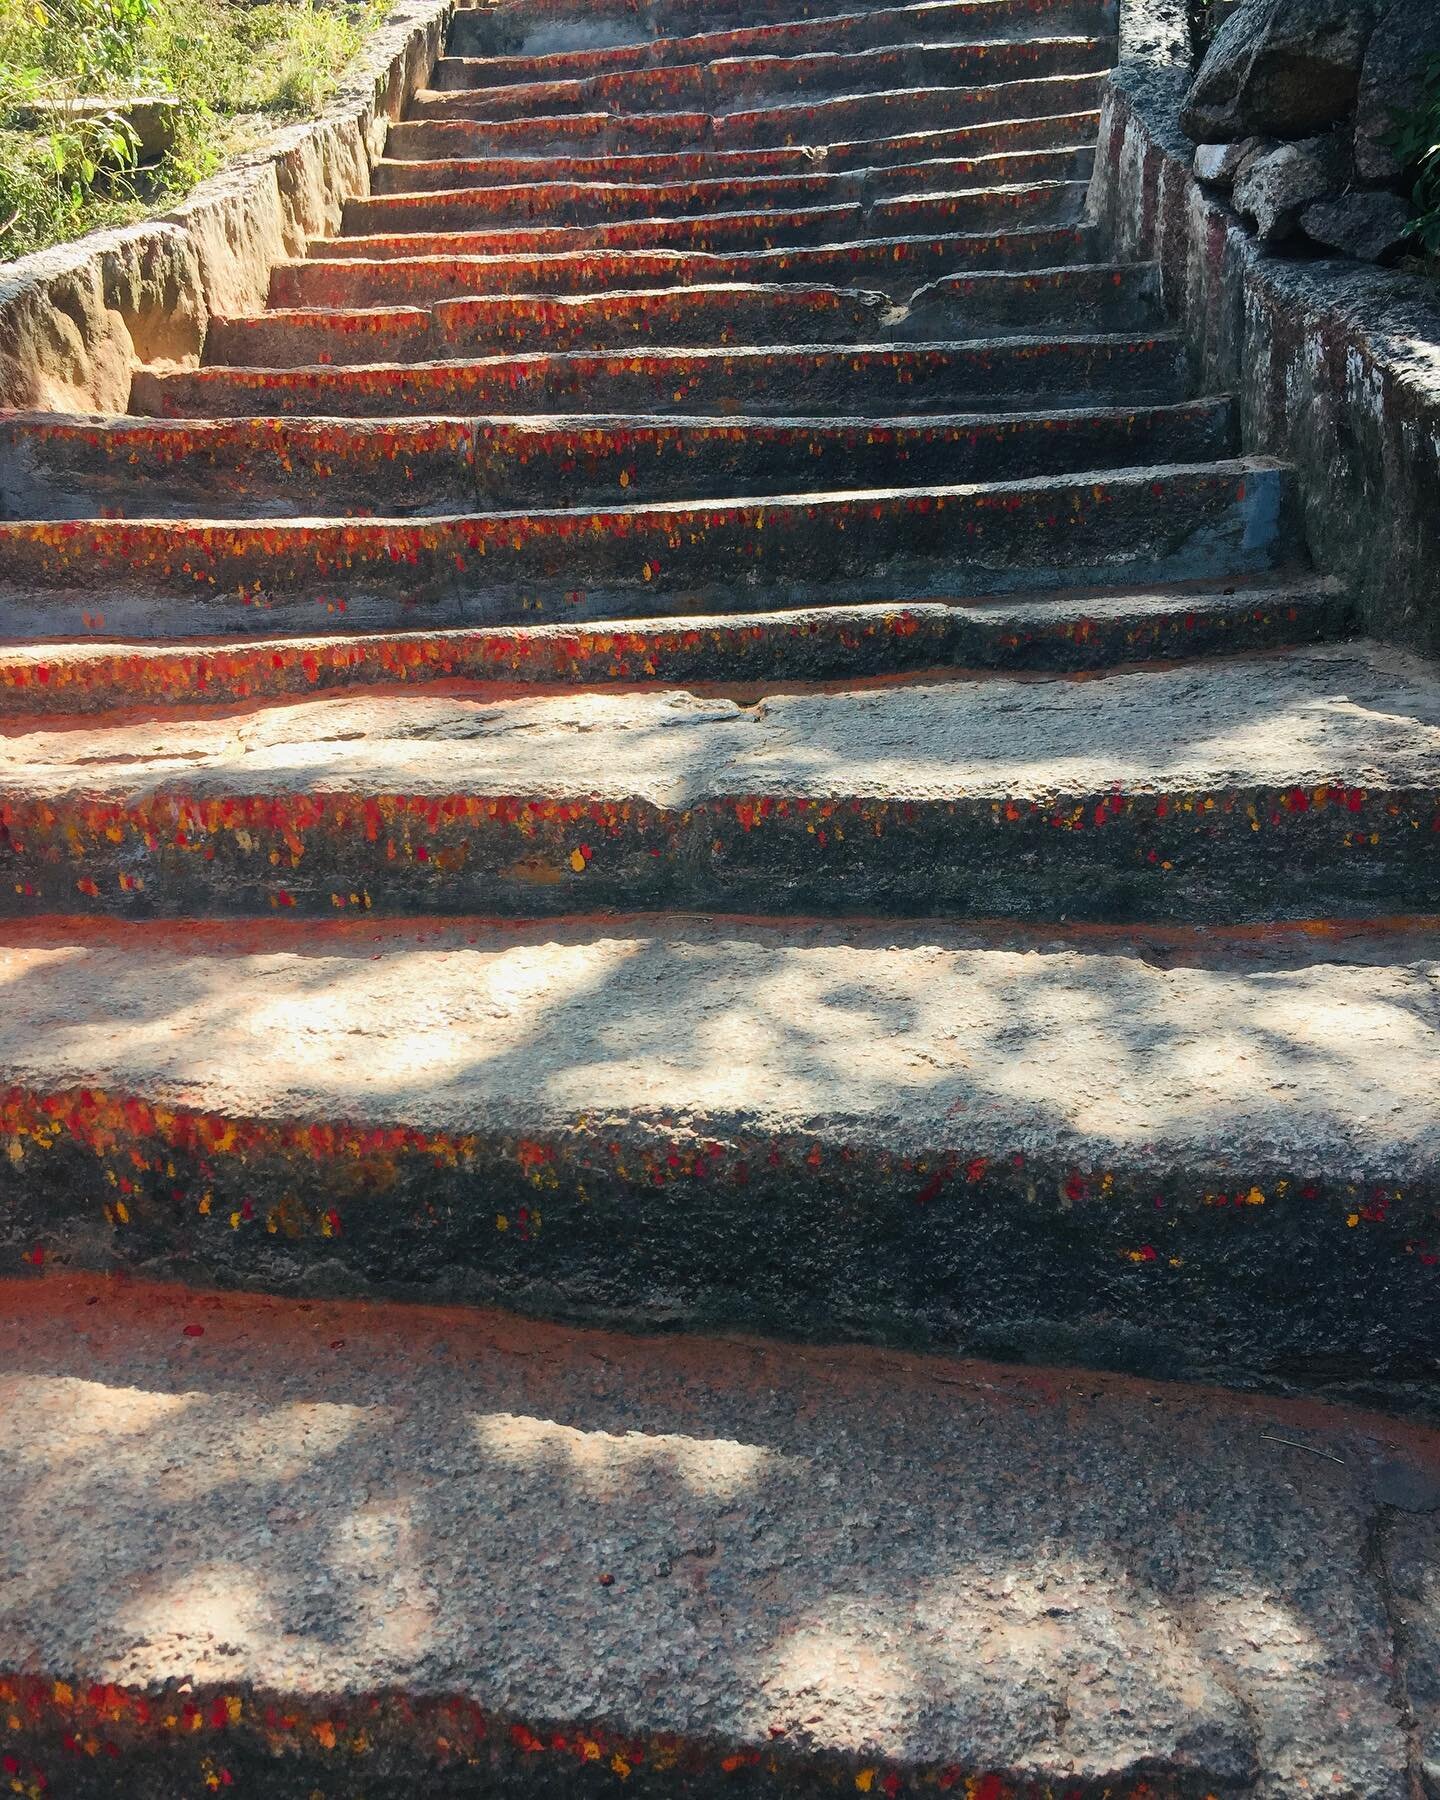 Devotion &amp; Practice.

1008 steps to the Chamundeshwari Temple in Mysore. Devotees smear vermilion and tumeric powder on each step as a tribute to the gods.
The stairs lead to the top of the hill which is held to be the site where the goddes Cāmuṇ